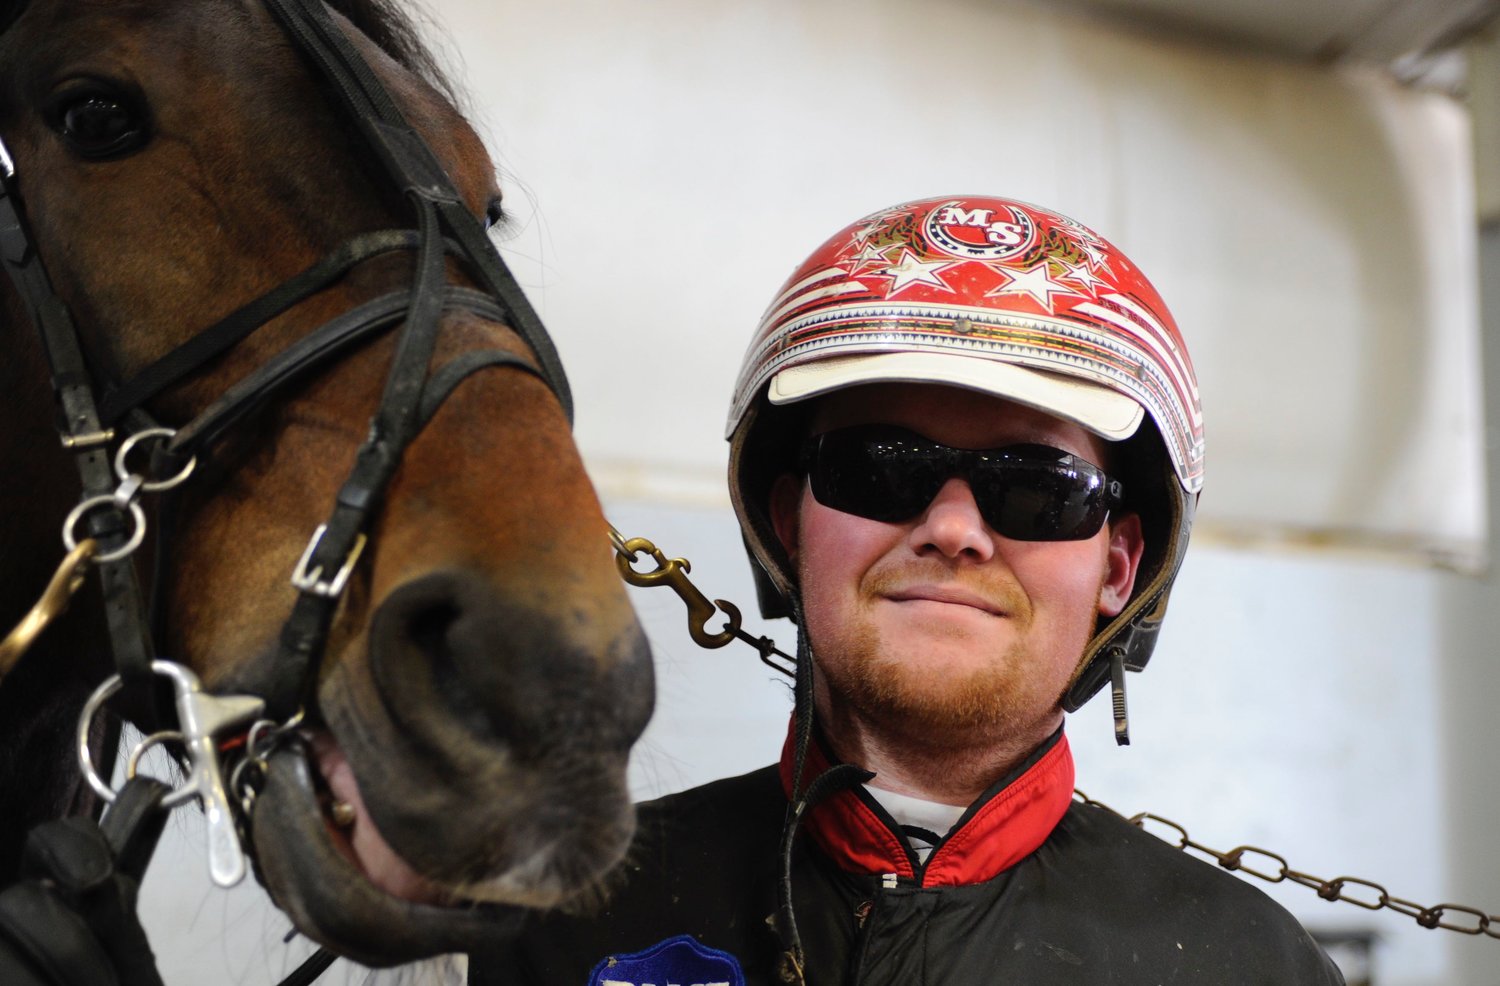 McGwire Sowers is an up-and-coming driver, hard on the heels of some of harness racing’s best.